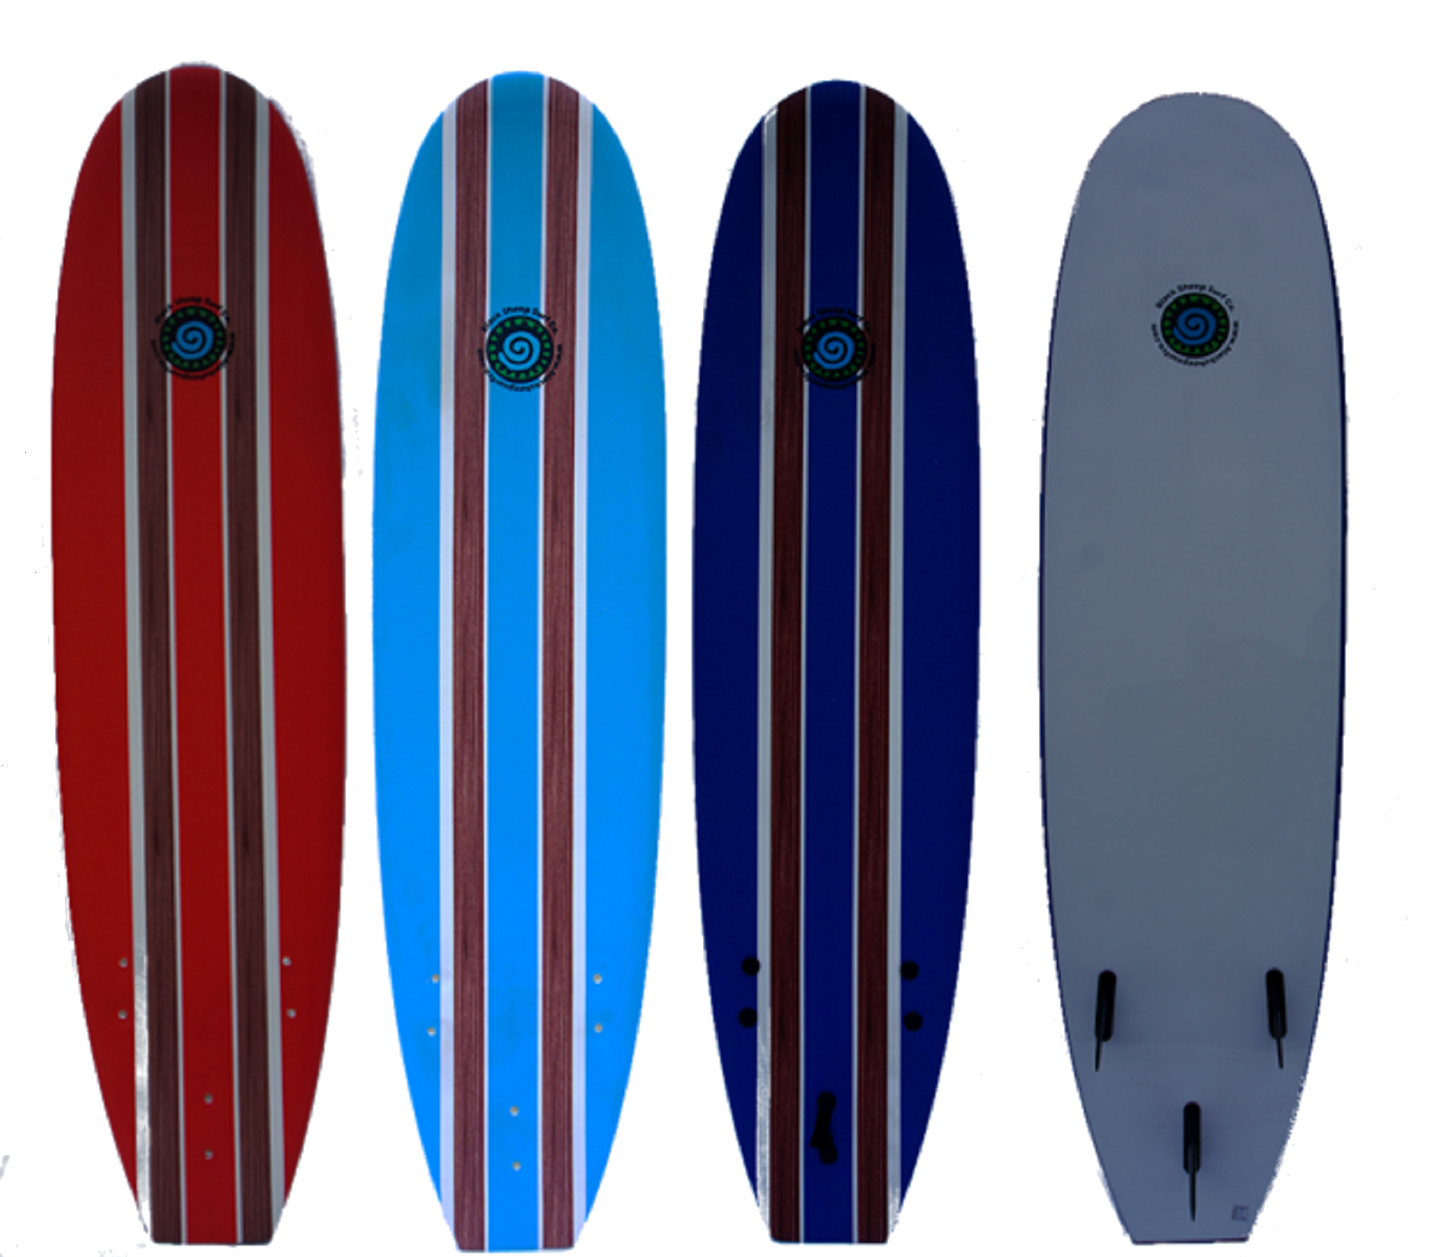 black-sheep-surf-co-6-2-colour-options-variants-softboard-surfboard-galway-ireland-surfing